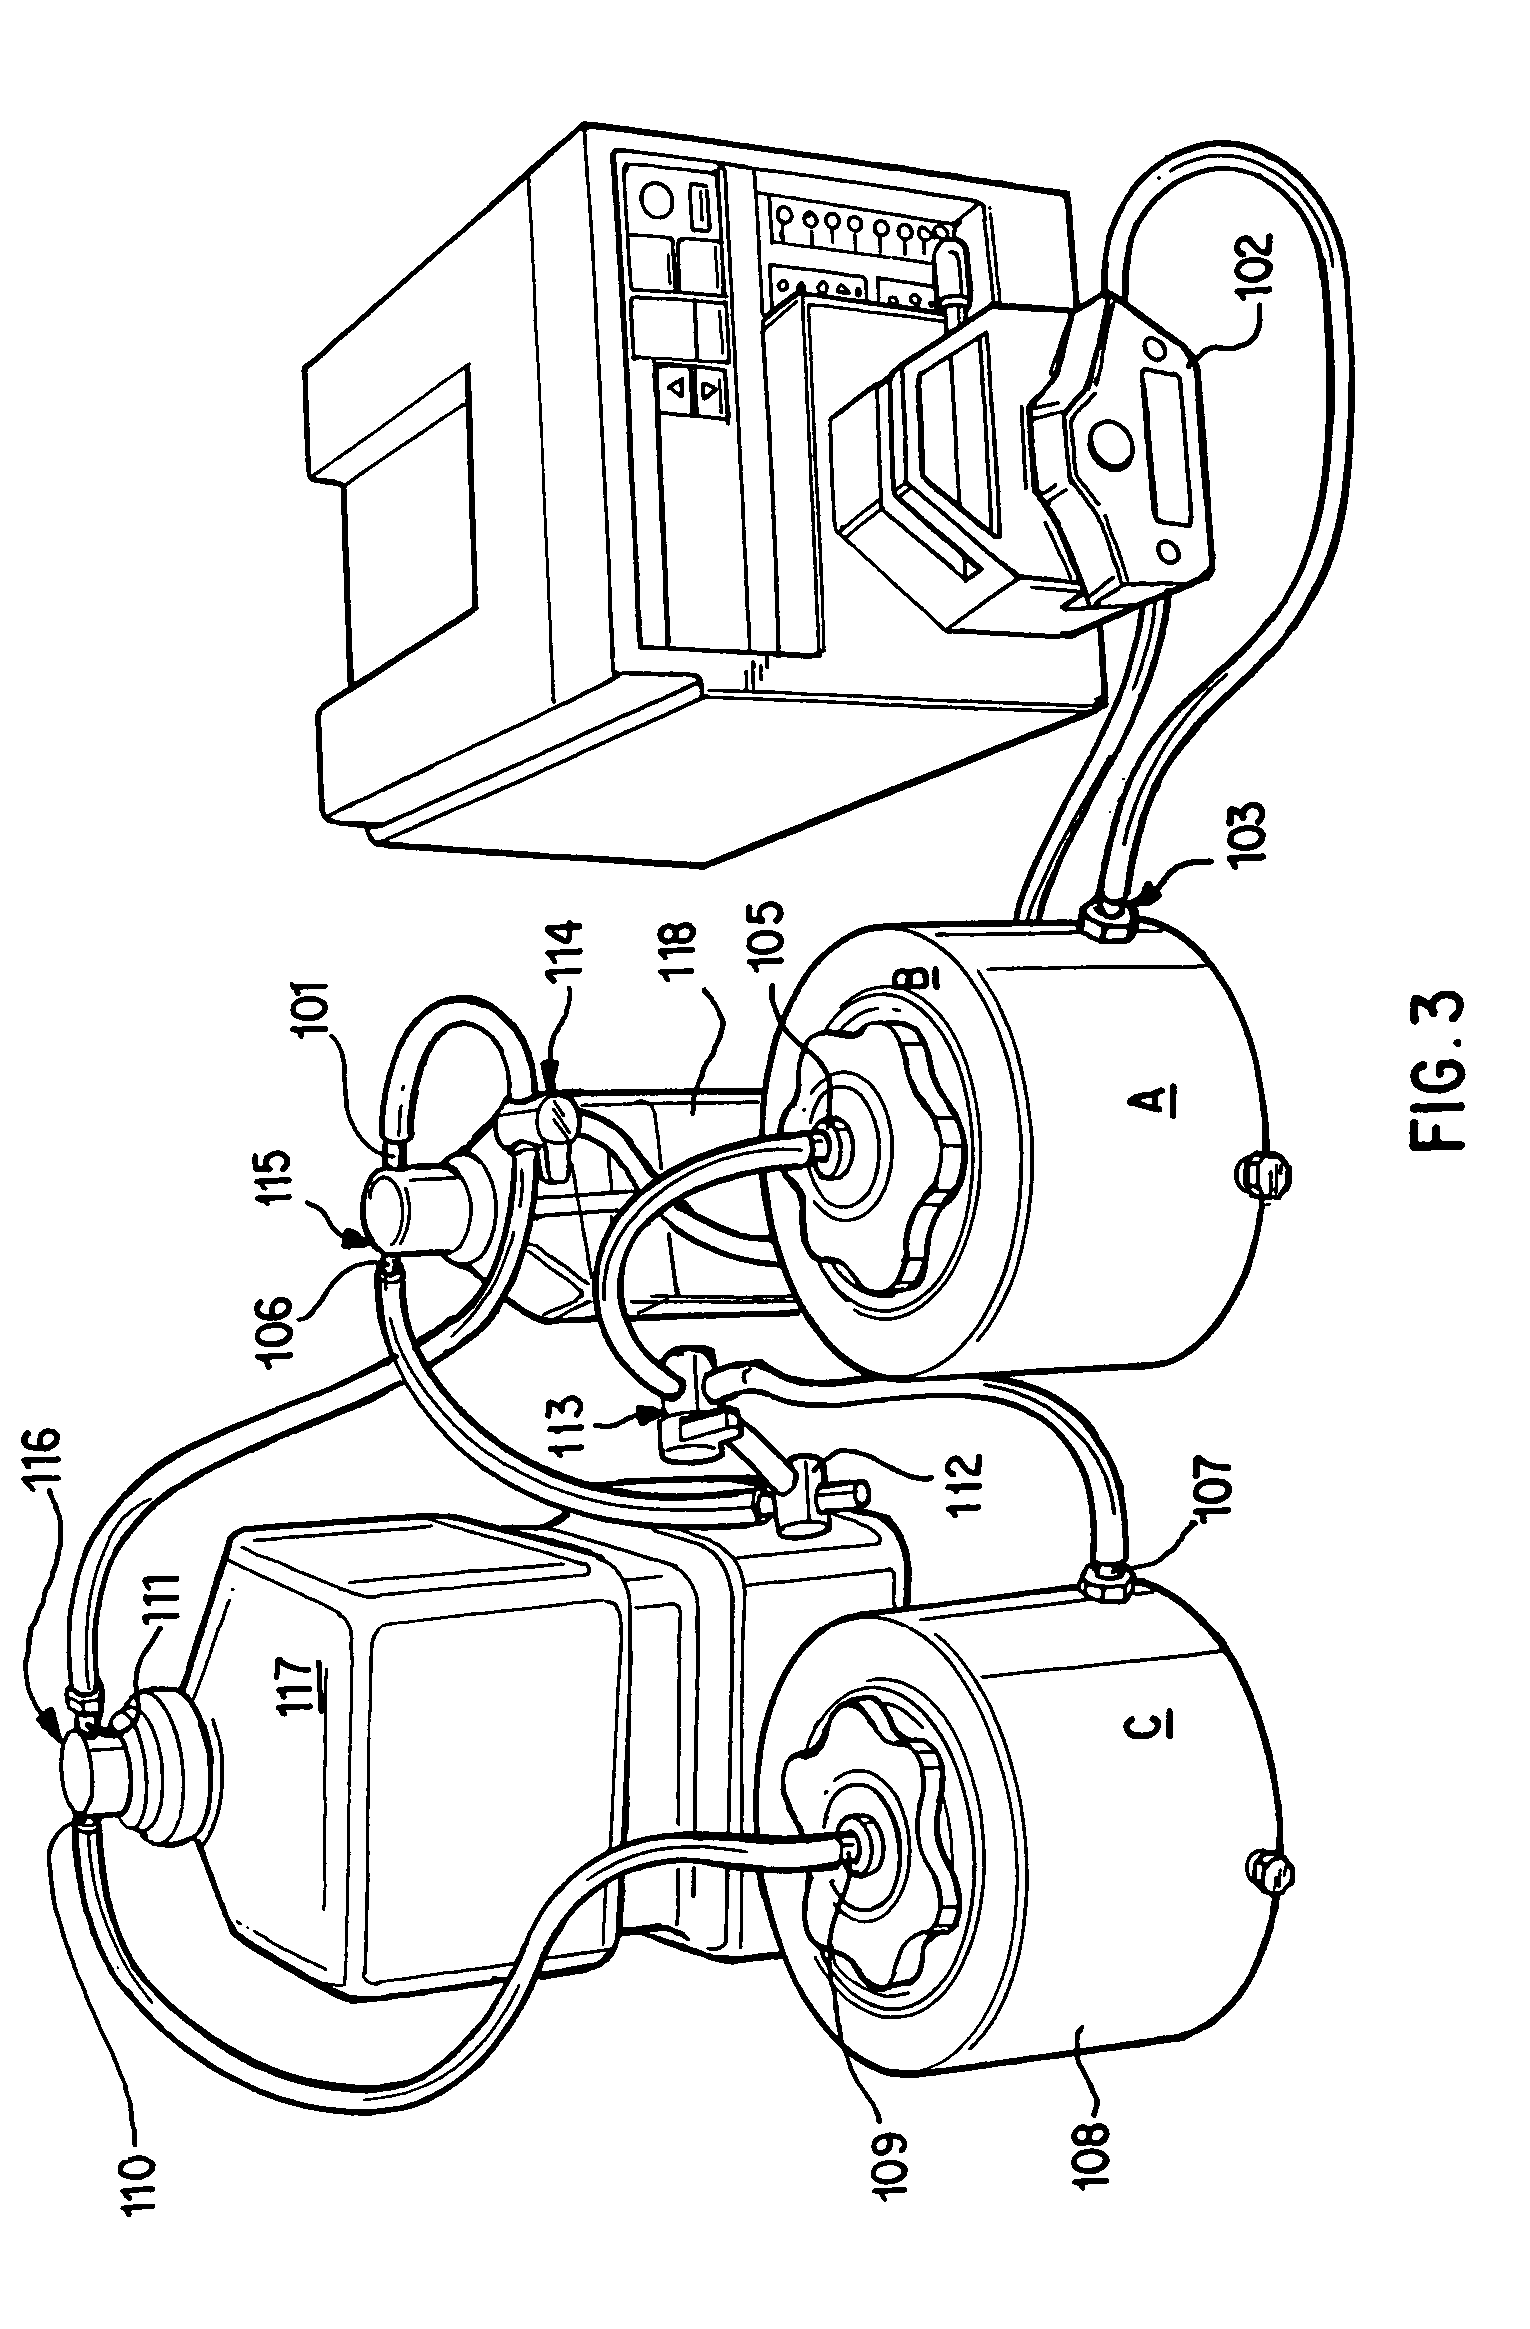 Process for devitalizing soft-tissue engineered medical implants, and devitalized soft-tissue medical implants produced